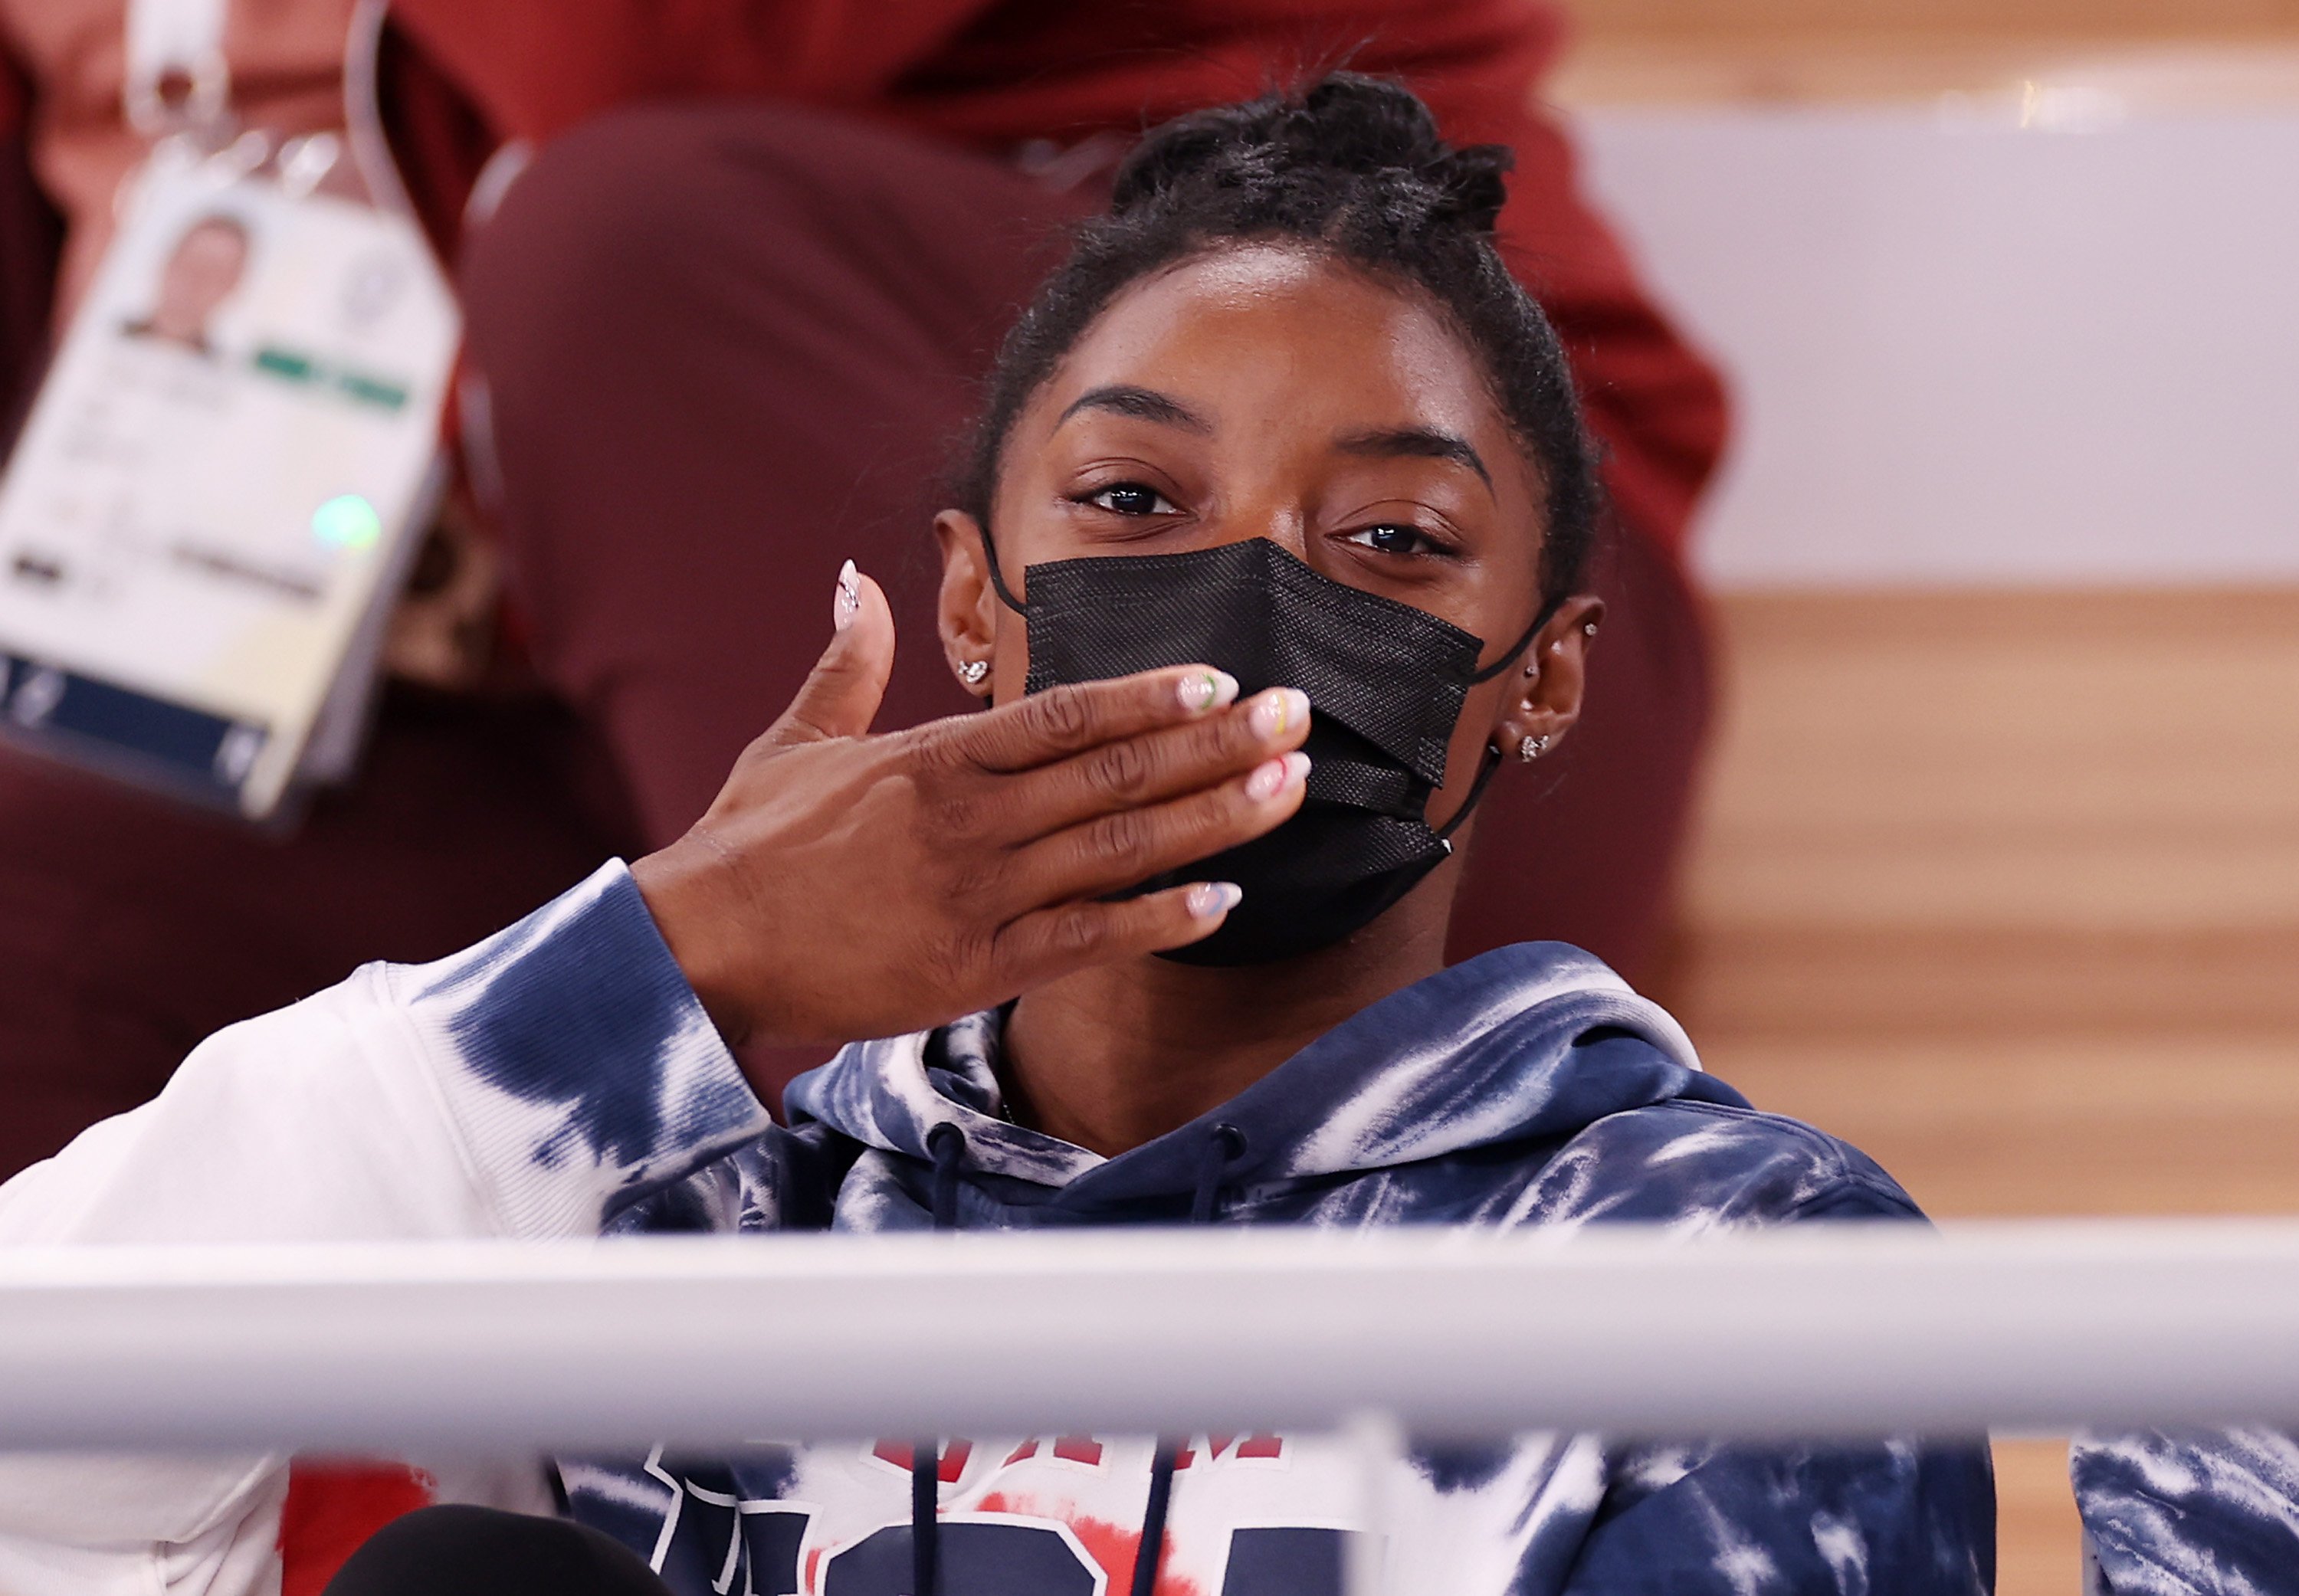 Simone Biles blows a kiss in the stands